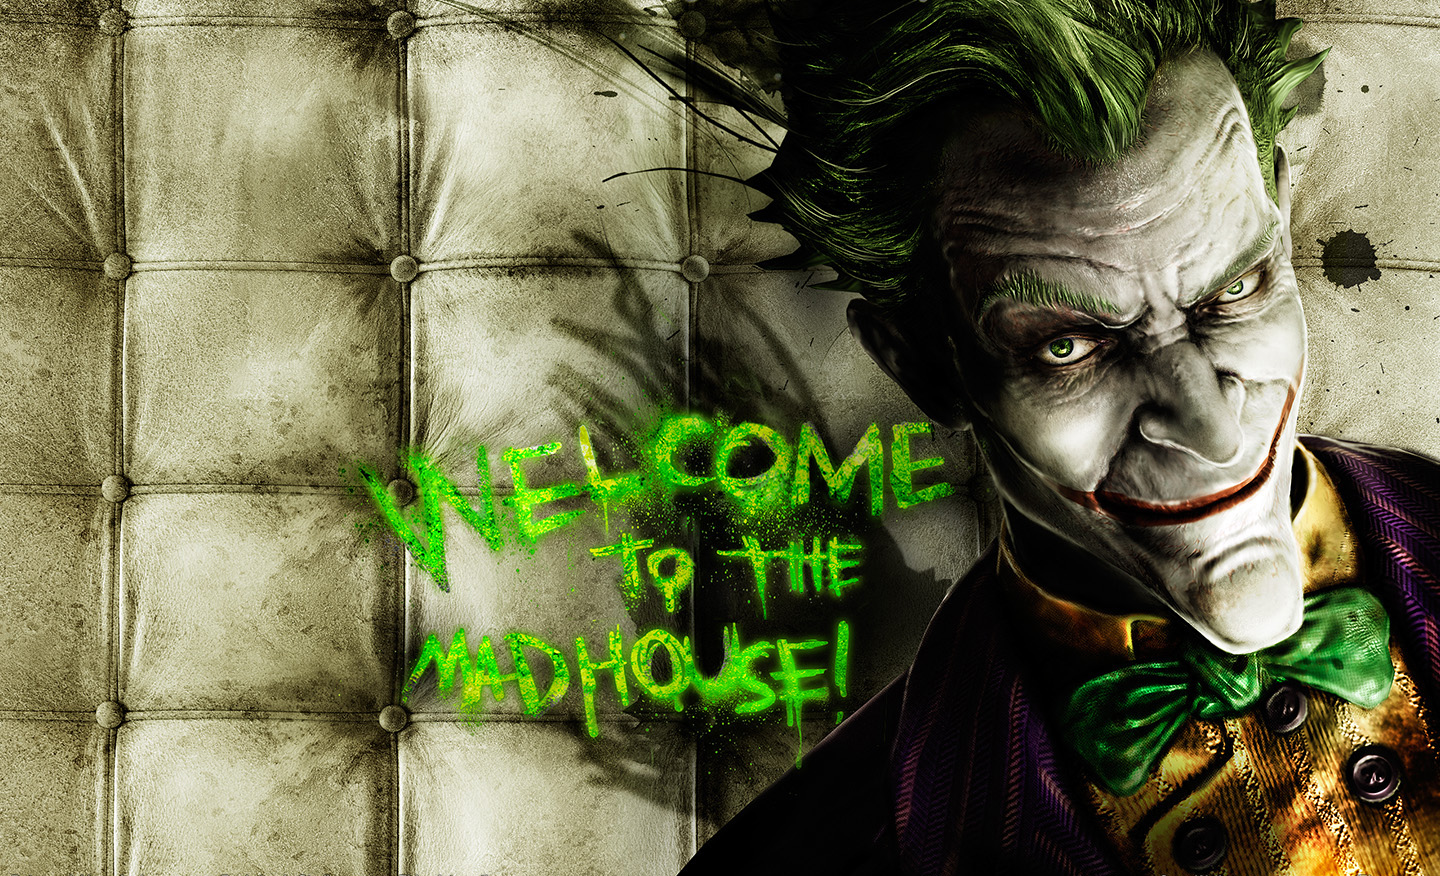 Welcome to the Madhouse